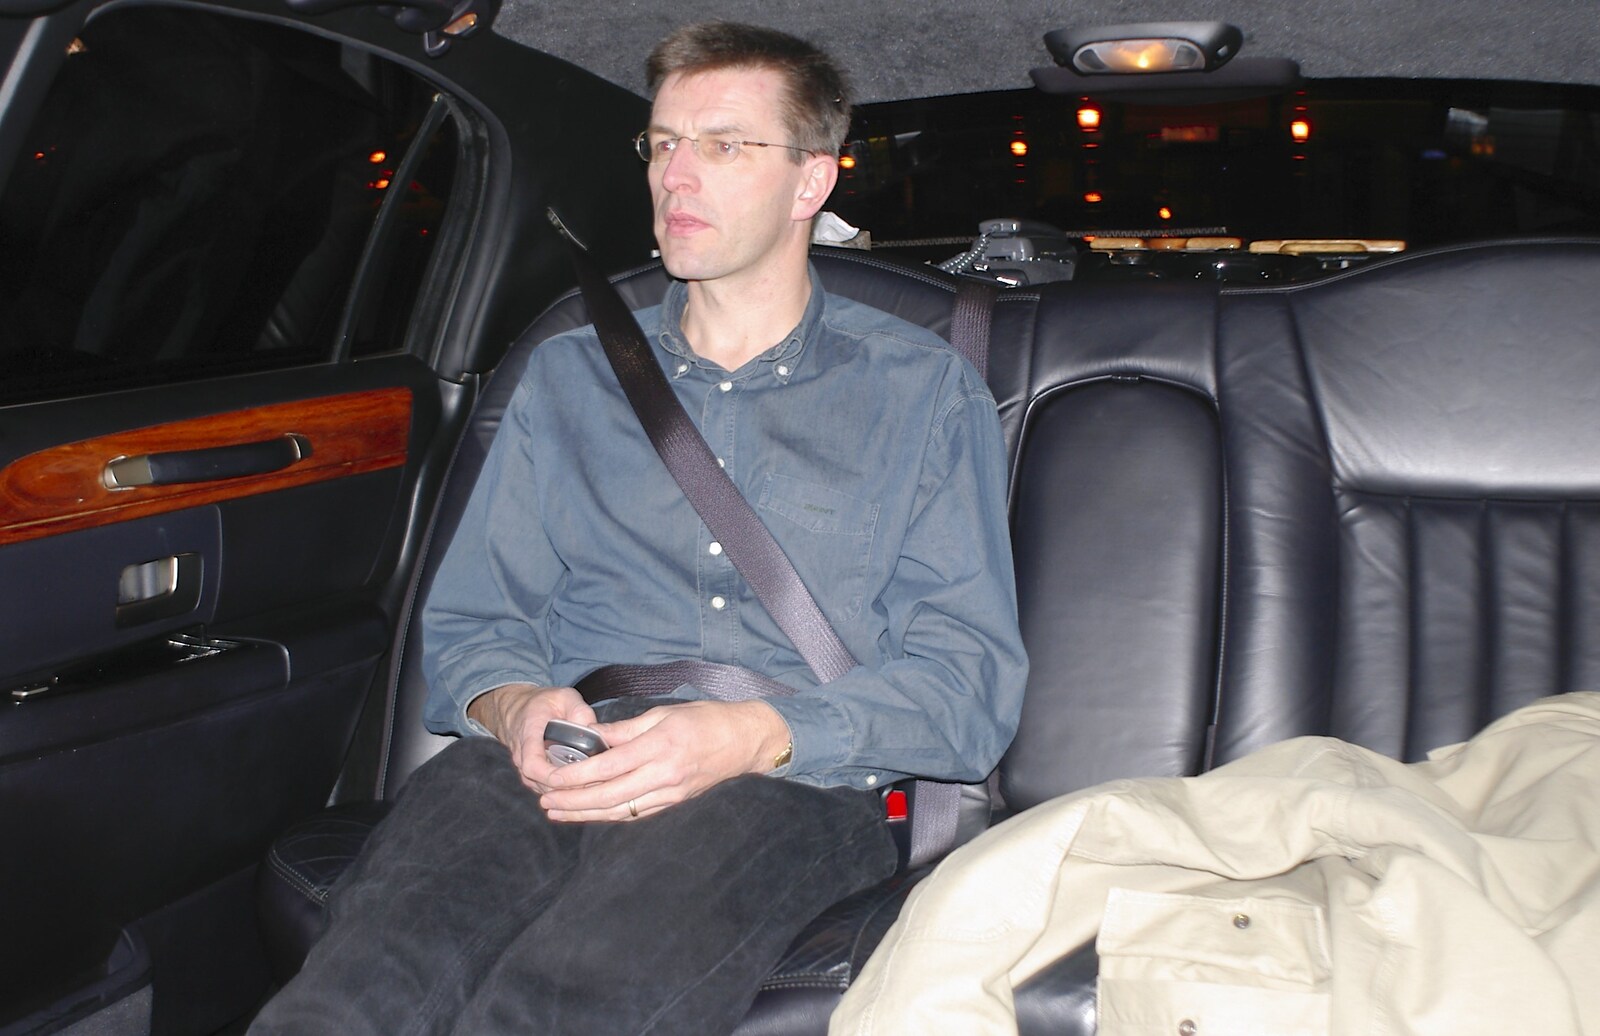 A Trip to San Diego, California, USA - 11th January 2005: John Scott in the back of a stretch limo